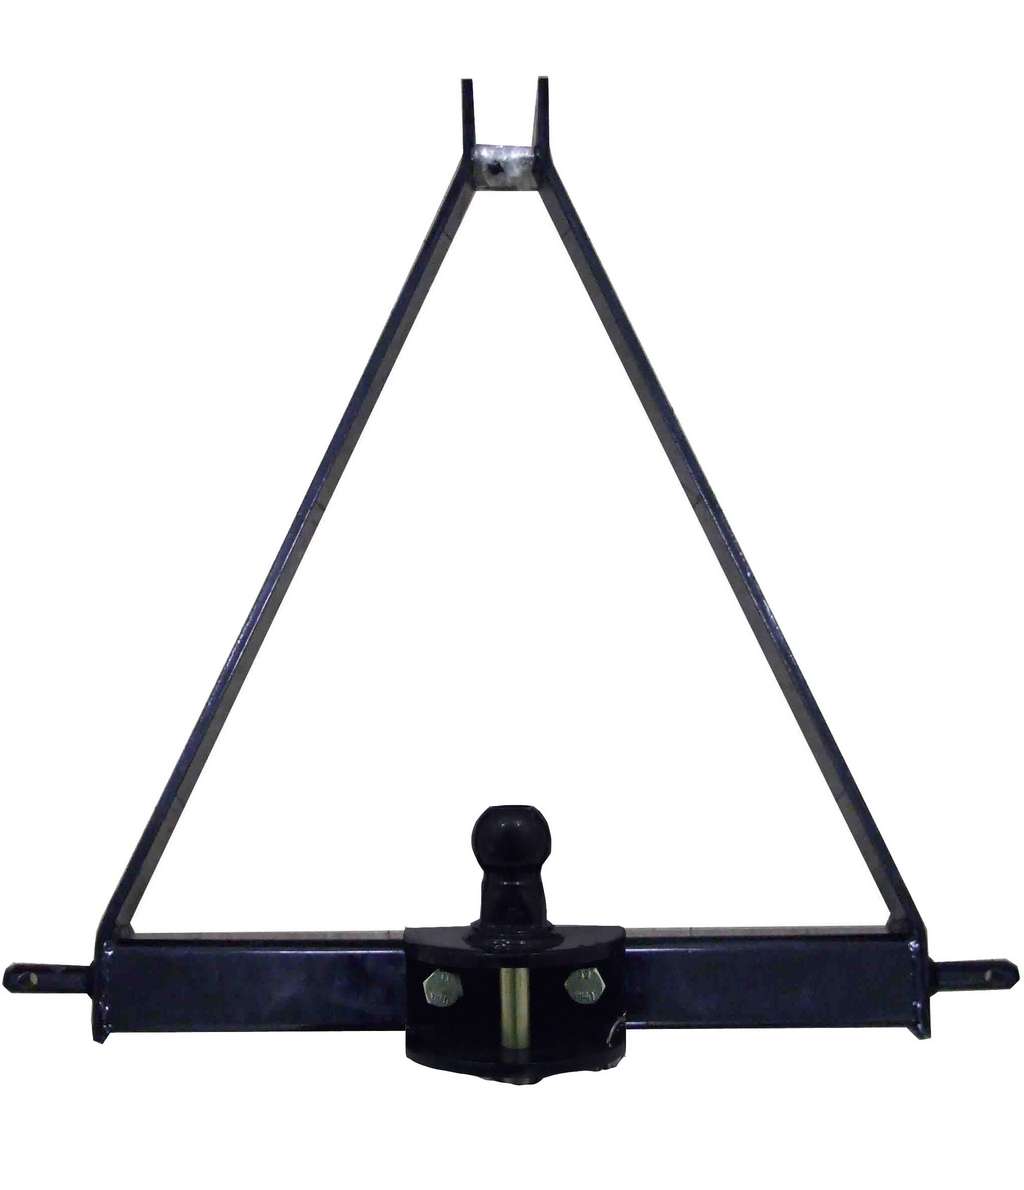 A Frame 3 Point Tow Hitch For Compact Tractor Mounted Towing Cat 1 Ball & Pin